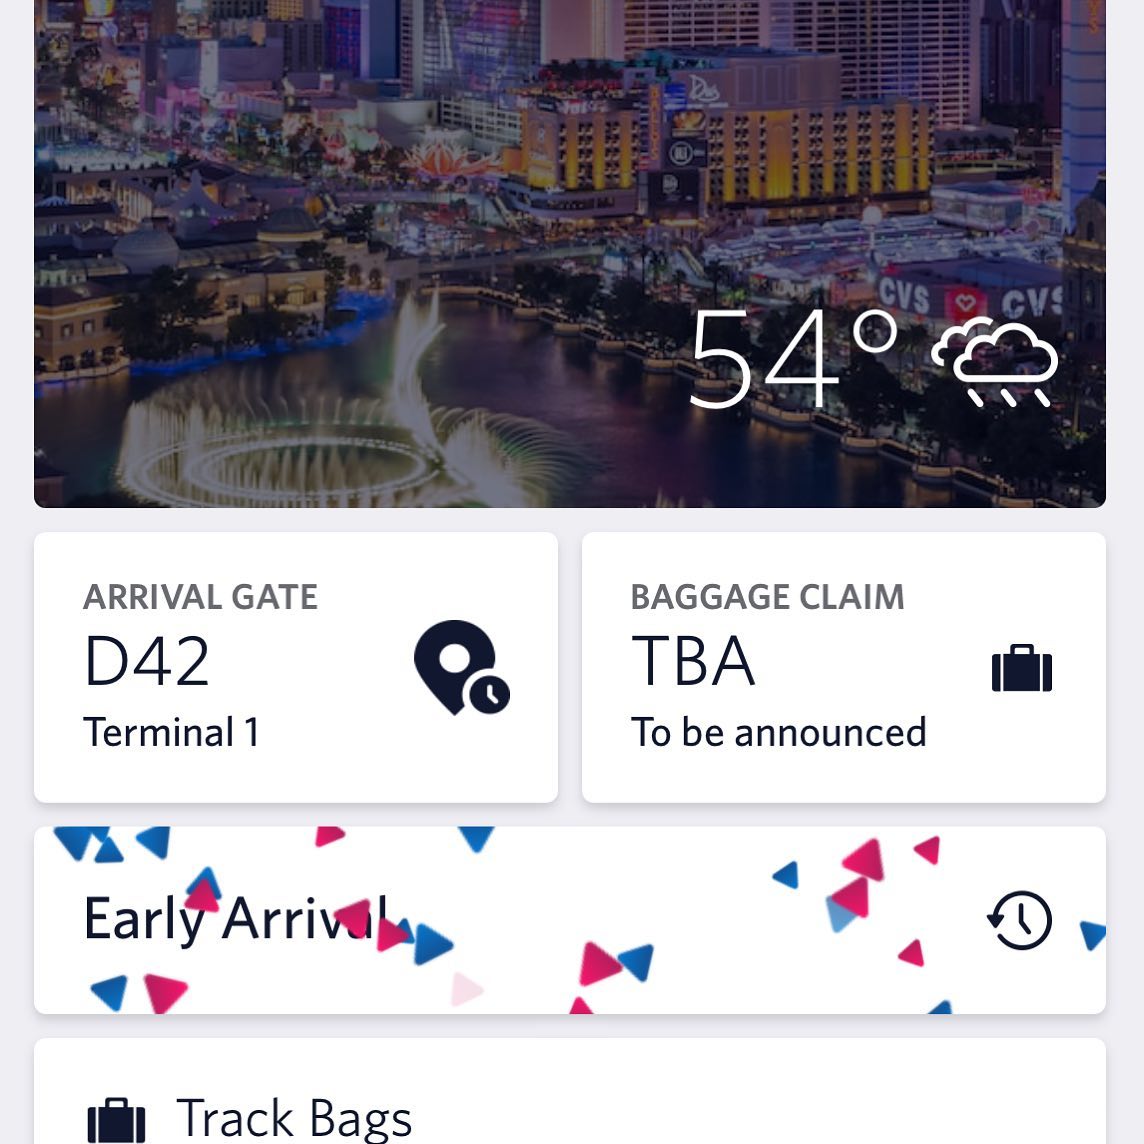 Flight arrived early? @delta throws confetti in the app to celebrate!

Designing moments of delight makes feel personal.